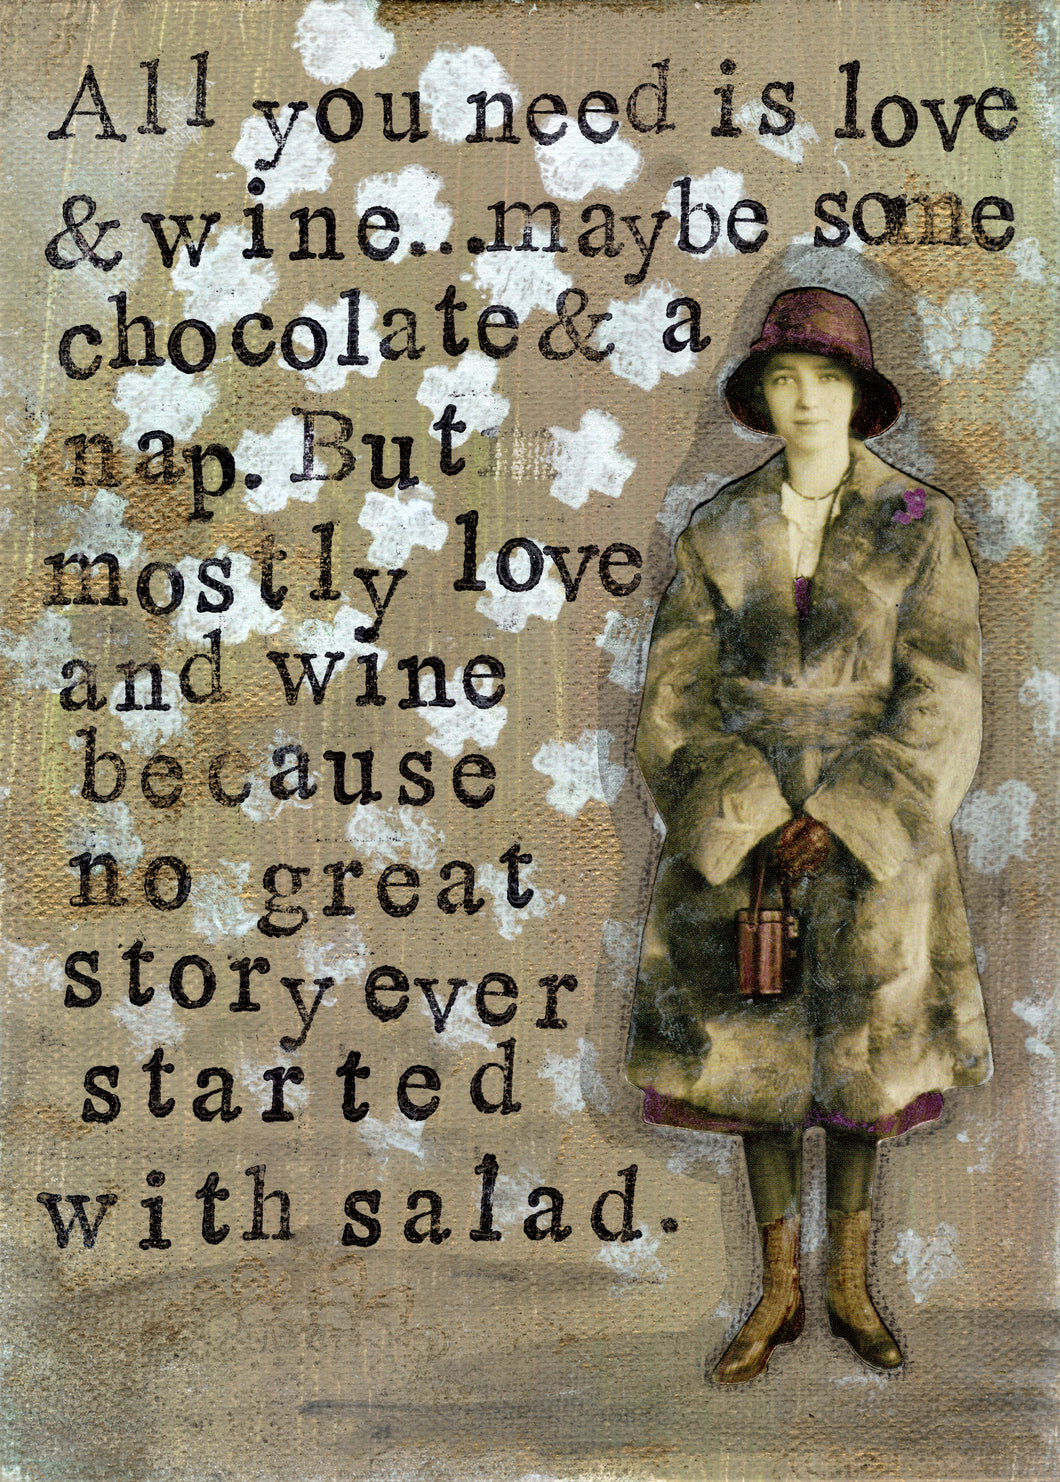 All you need is love and wine...maybe some chocolate and a nap. But mostly love because no great story ever started with salad.